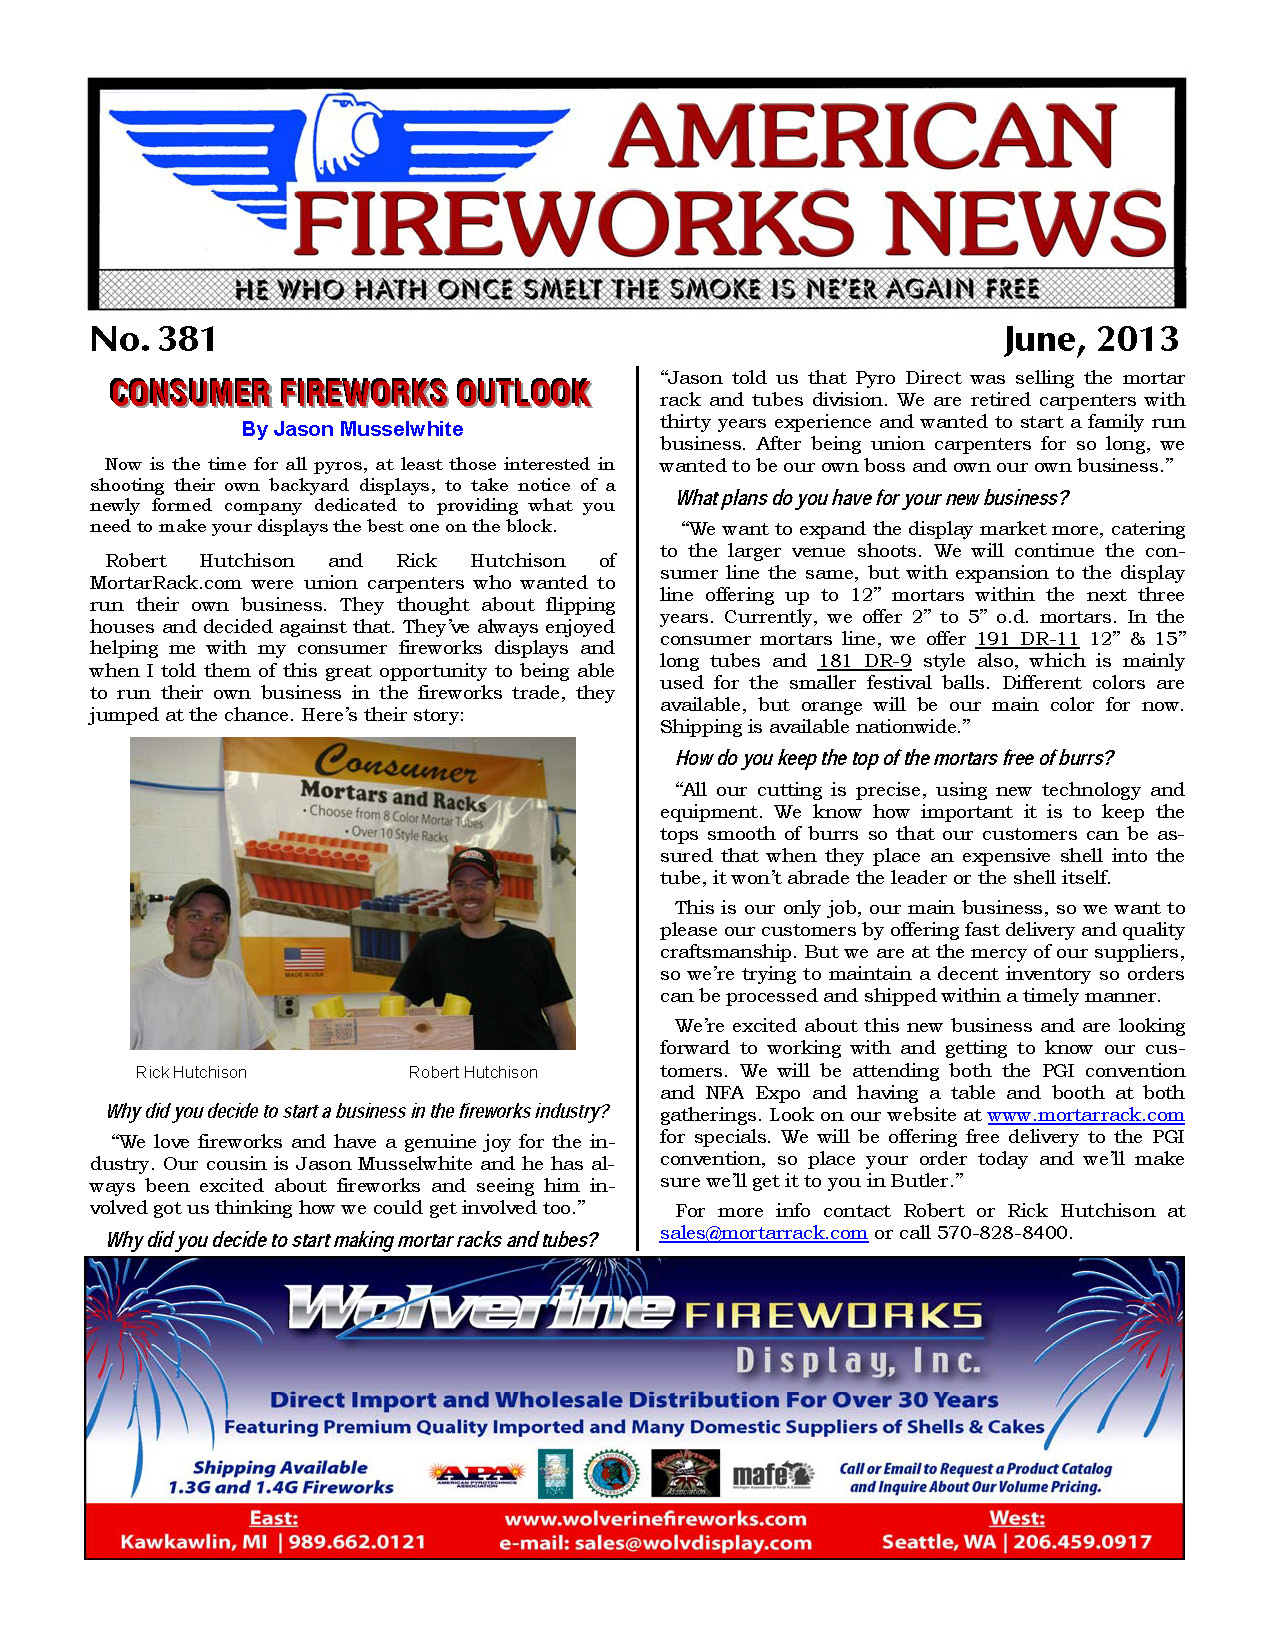 S1E 2014 - American Fireworks News newsletter all 12 issues for 2014